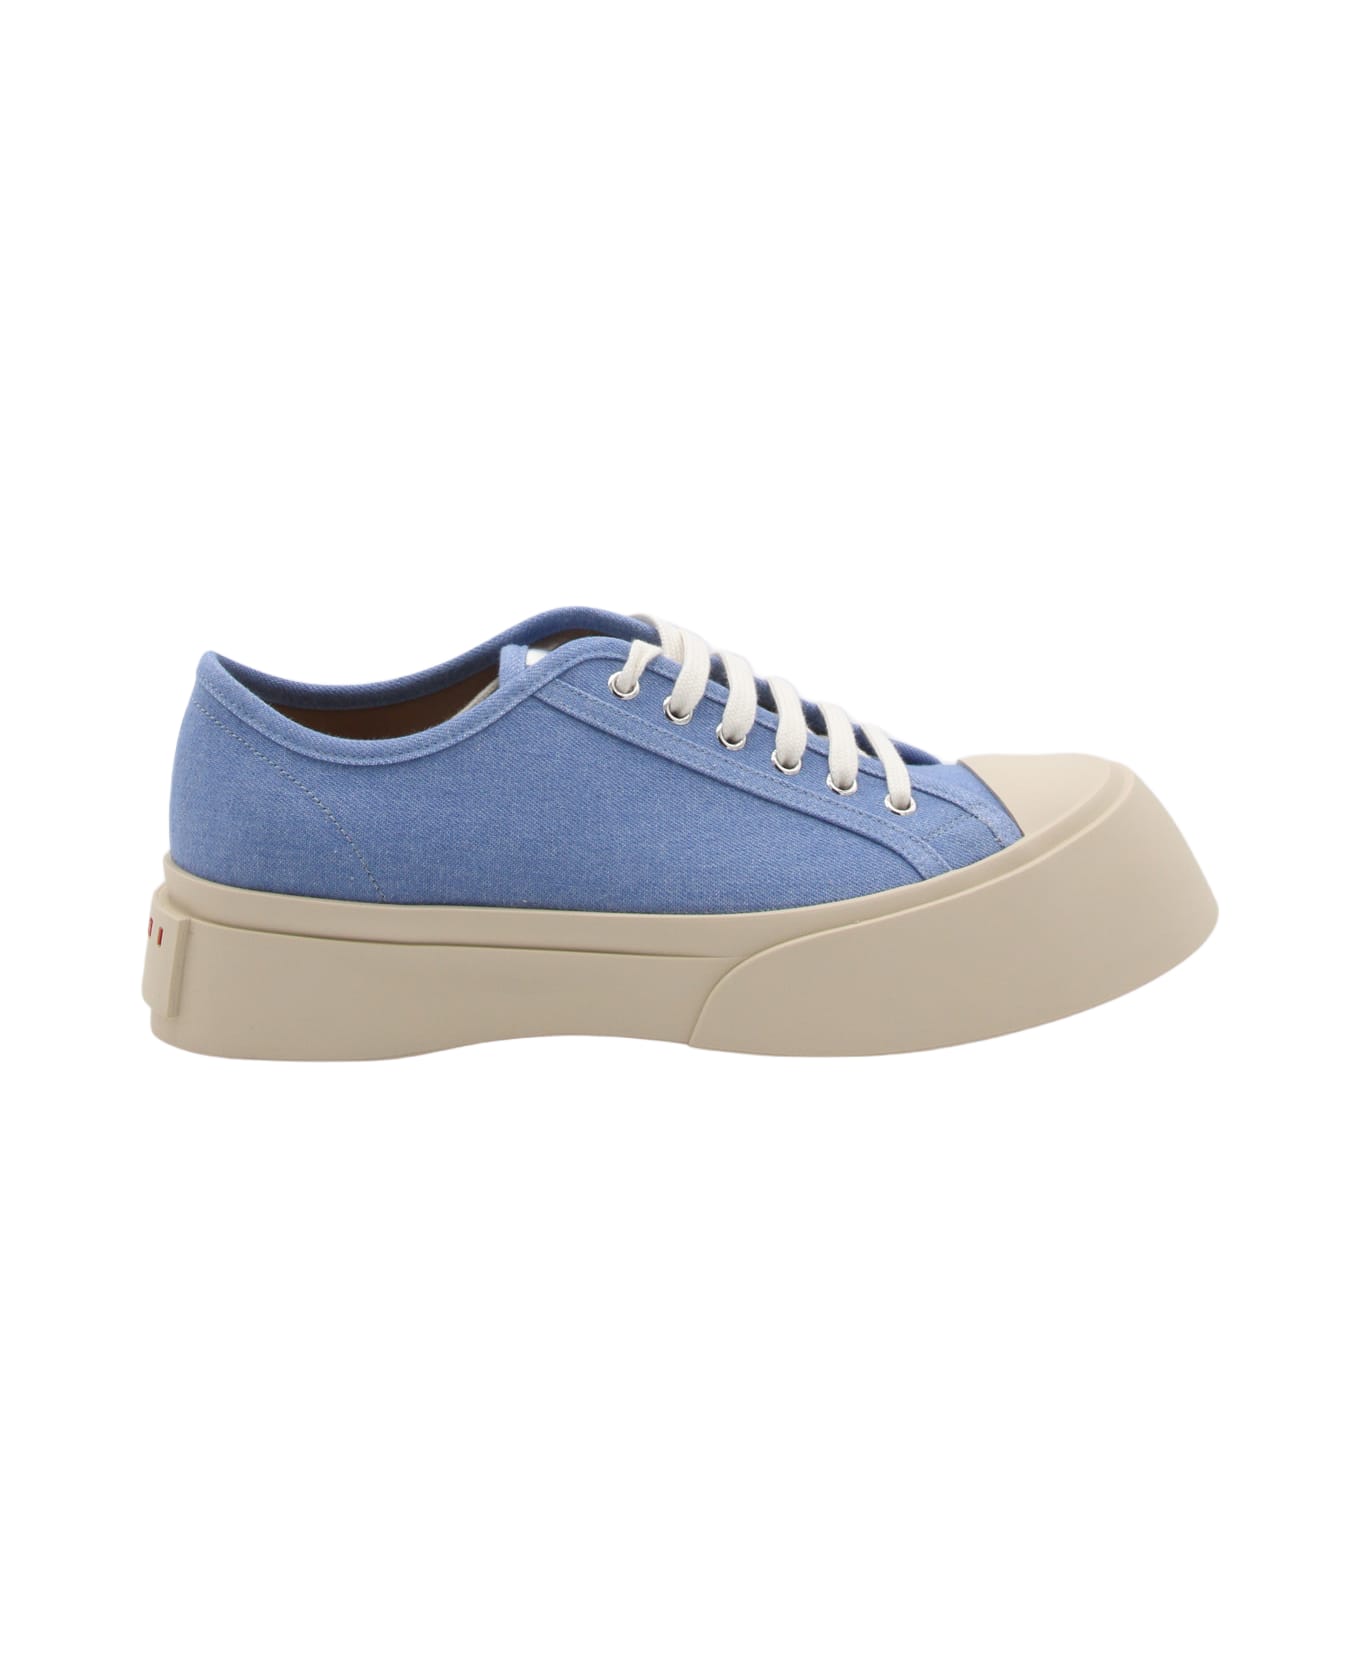 Marni Light Blue Leather Sneakers - Blue スニーカー